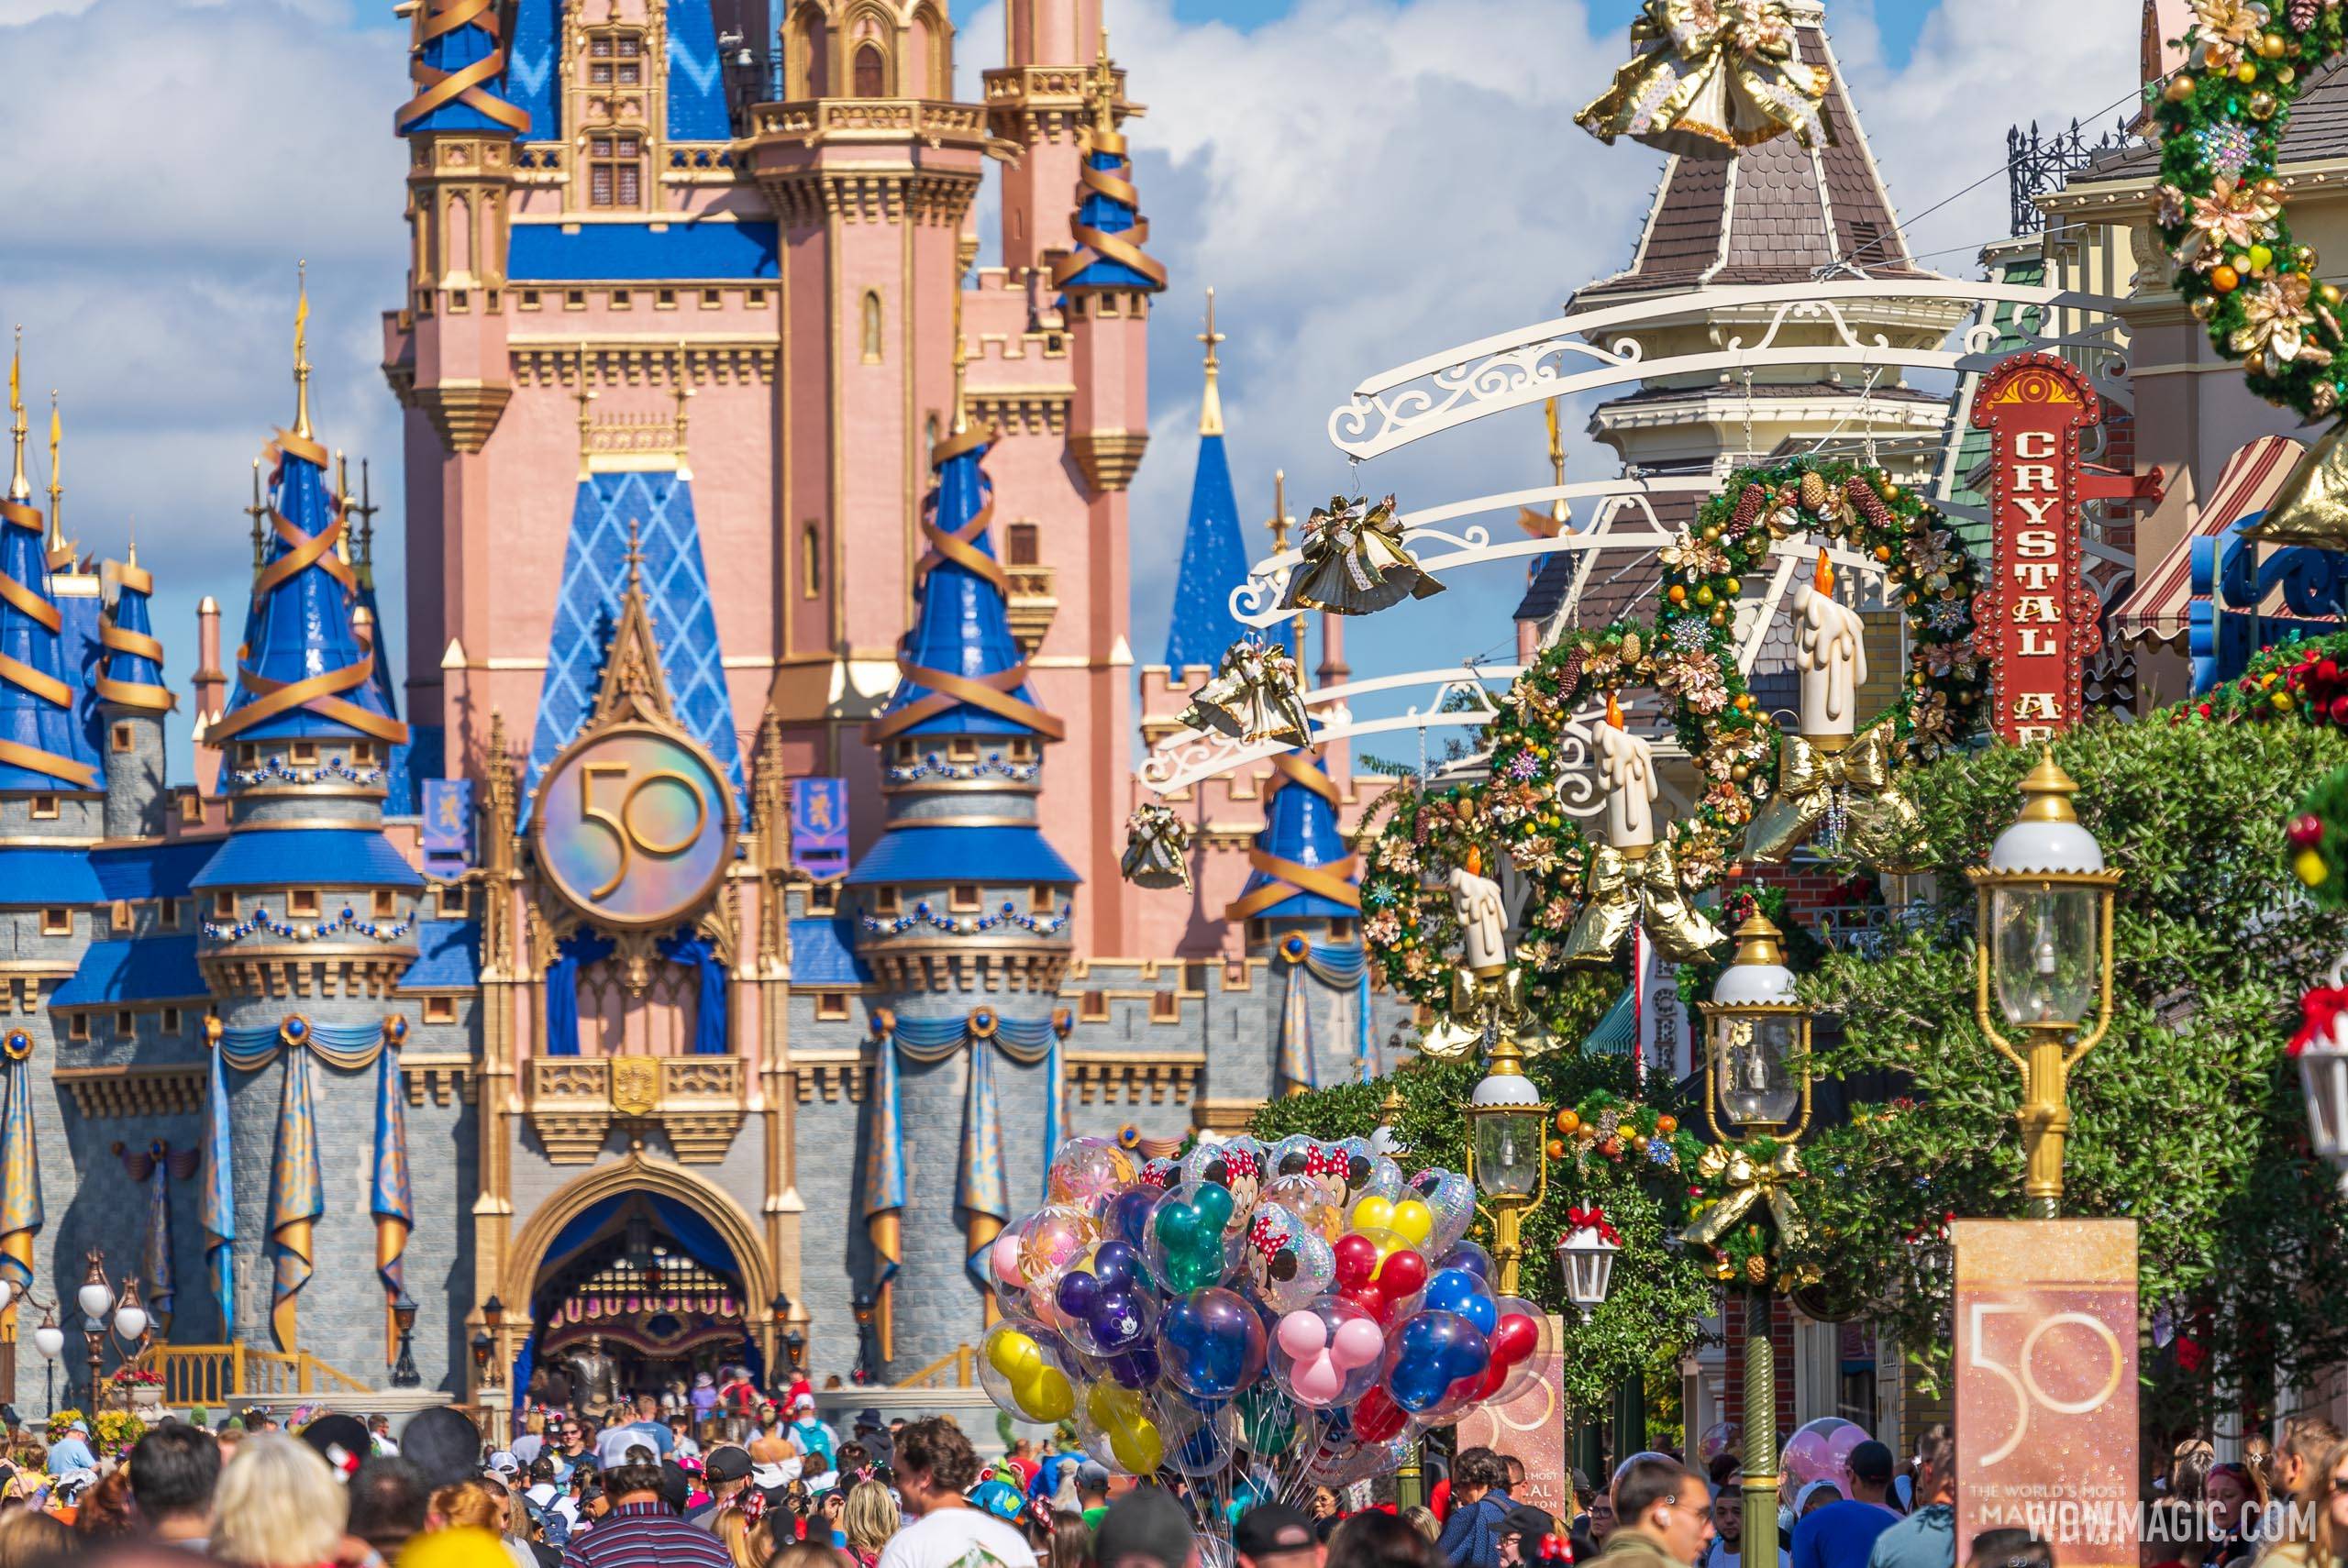 Walt Disney World operating hours are now available through mid-February 2022